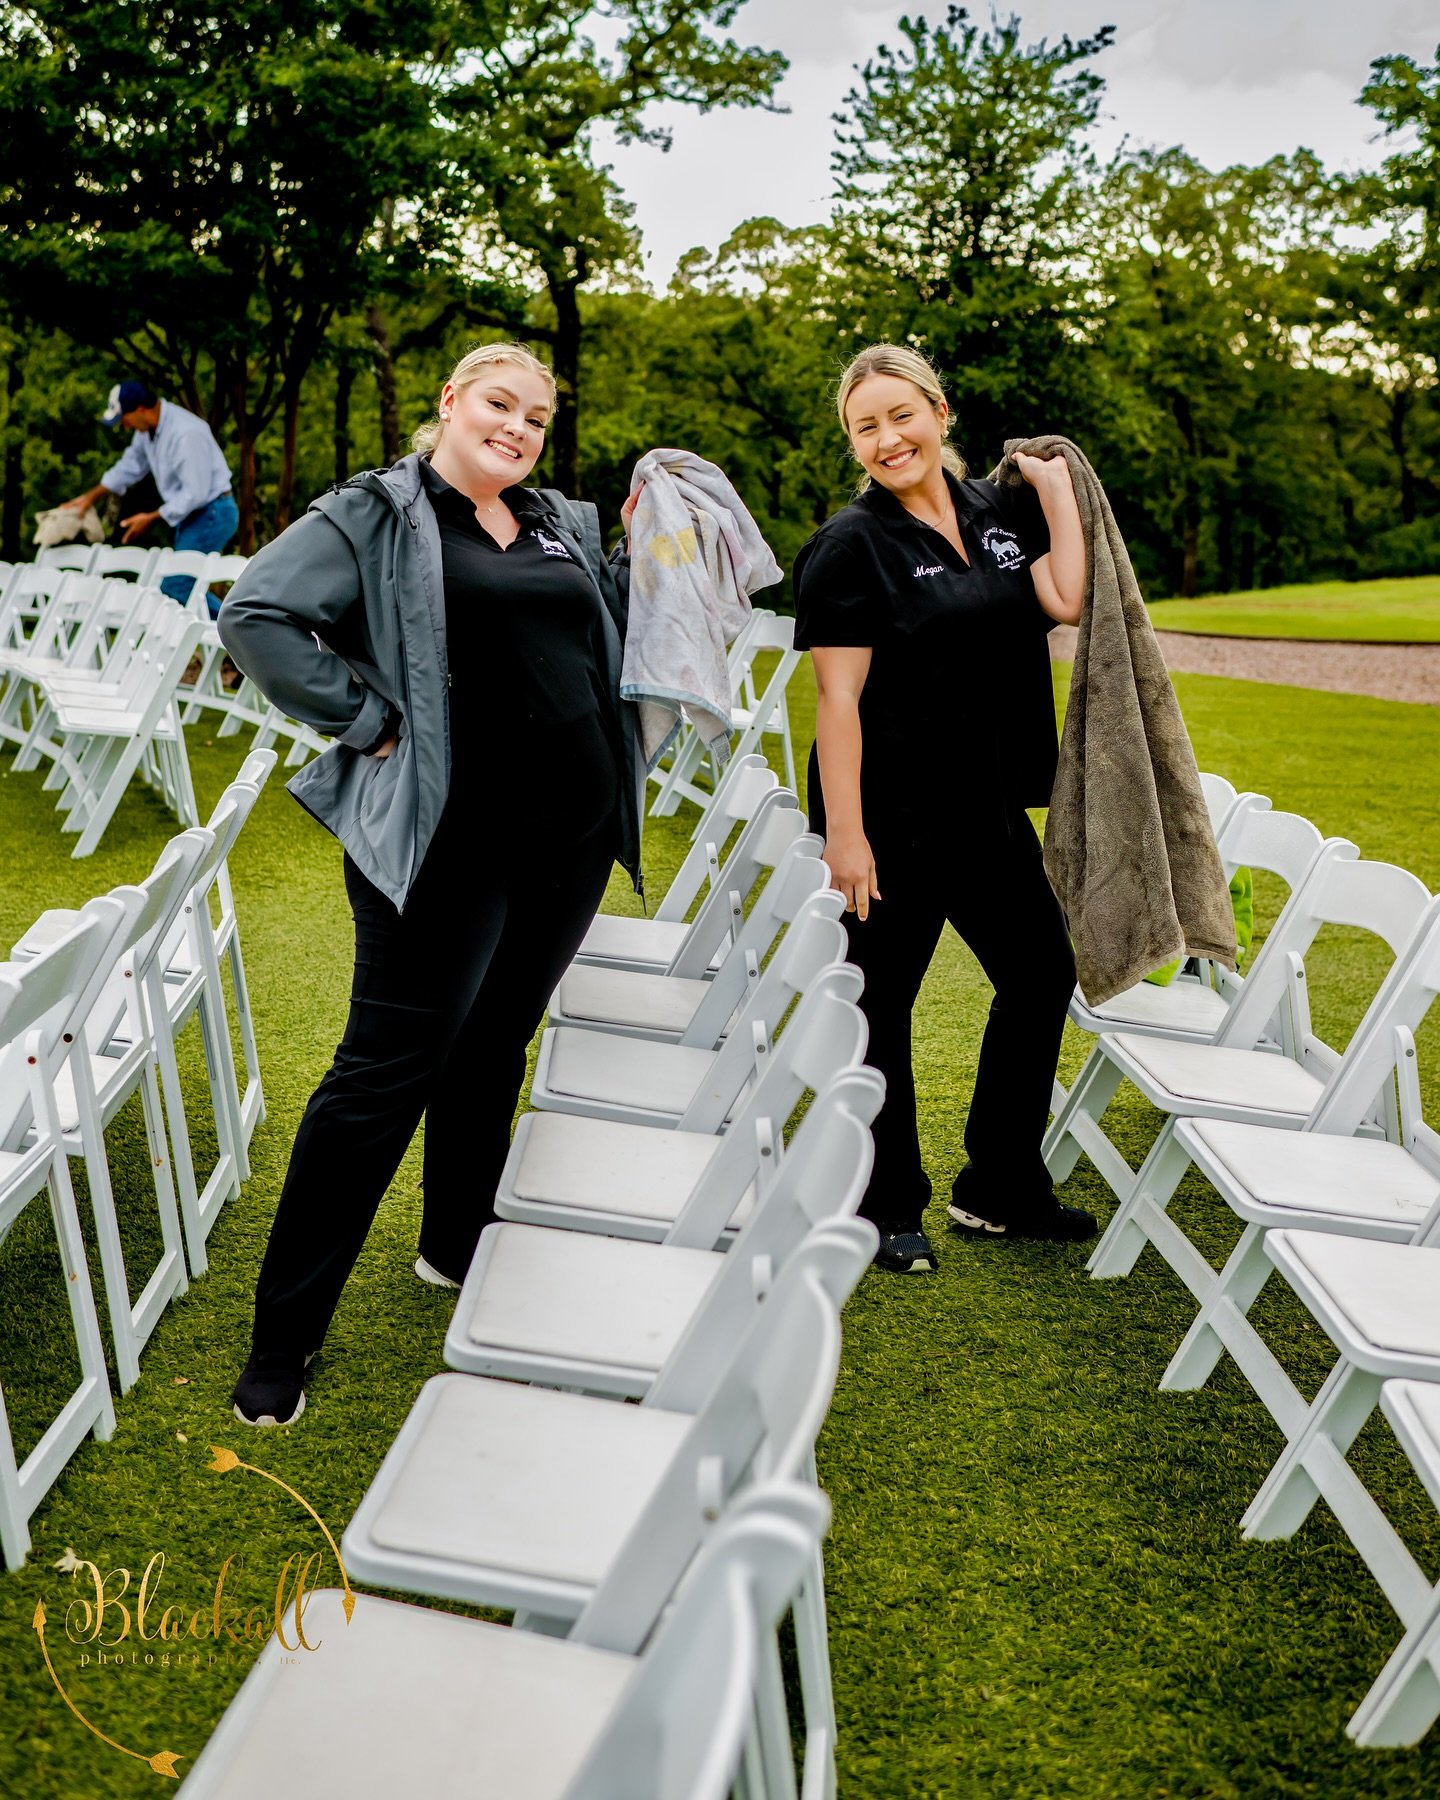 Those BCE girls makin&rsquo; it happen! They went above &amp; beyond to make sure our sweet couple got the outside wedding of their dreams! 
&zwnj;
✌🏻💛📸
&zwnj;
@bellacavallievents
@blackallphotography
@atimetoshinefloraldesign
@paradiseprodjs
@the